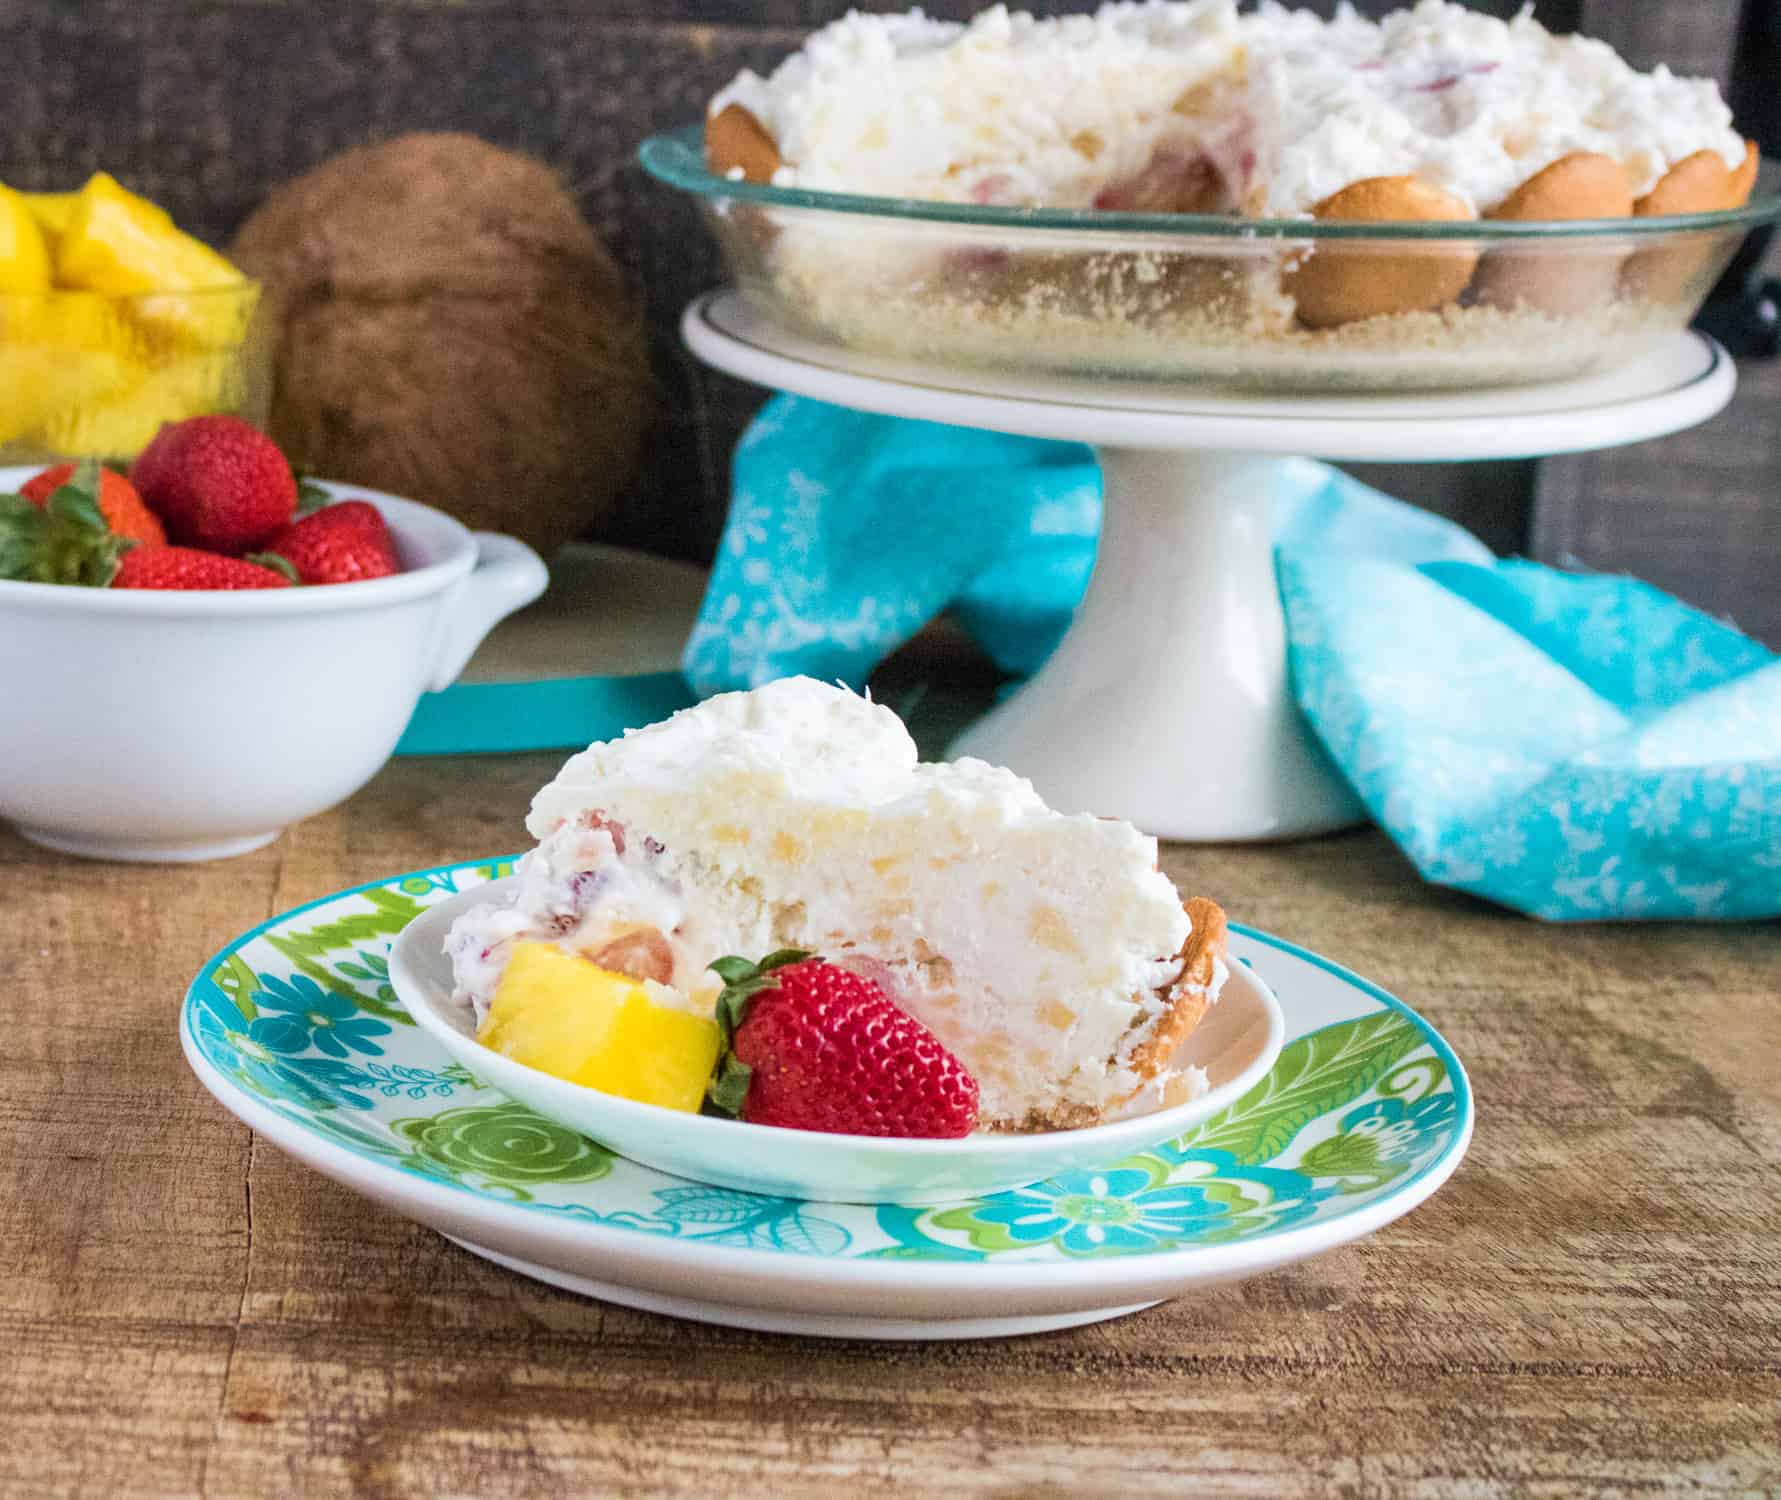 piece of no bake tropical cream pie on a small with dish sitting on a blue and green liner plate with white bowl of strawberries in background next to a white cake stand holding the pie plate of no bake tropical cream pie